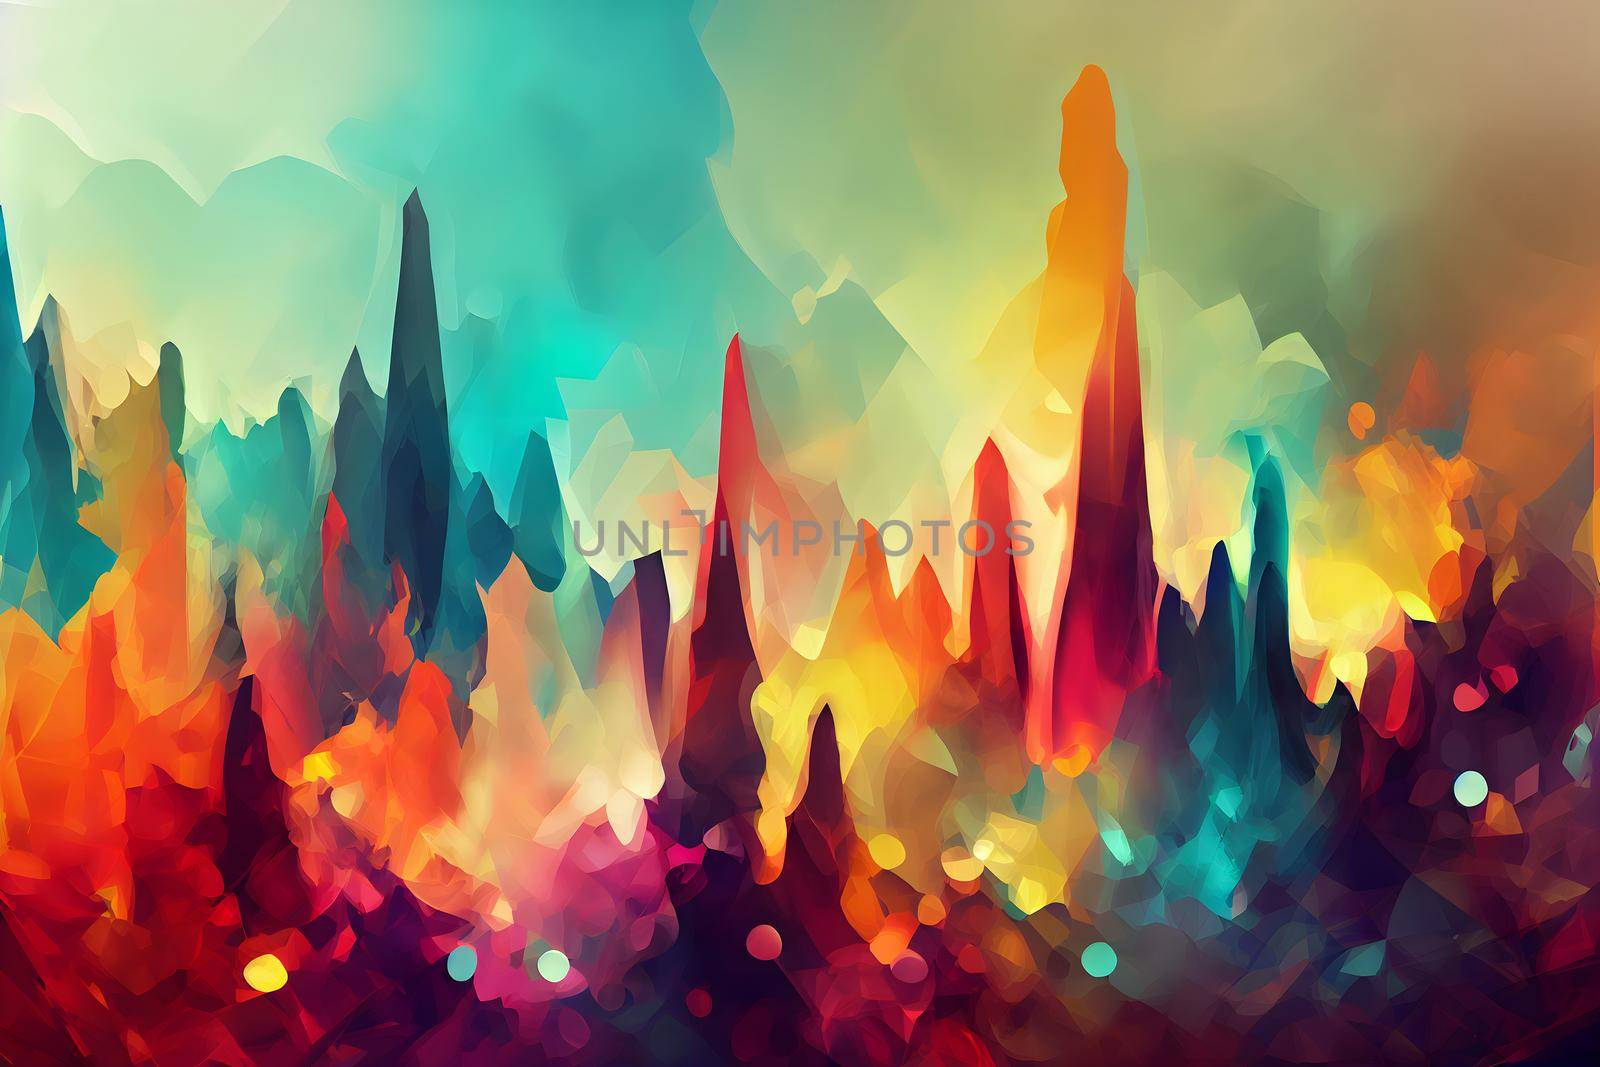 abstract flat background with colorful painted spikes, neural network generated art. Digitally generated image. Not based on any actual scene or pattern.